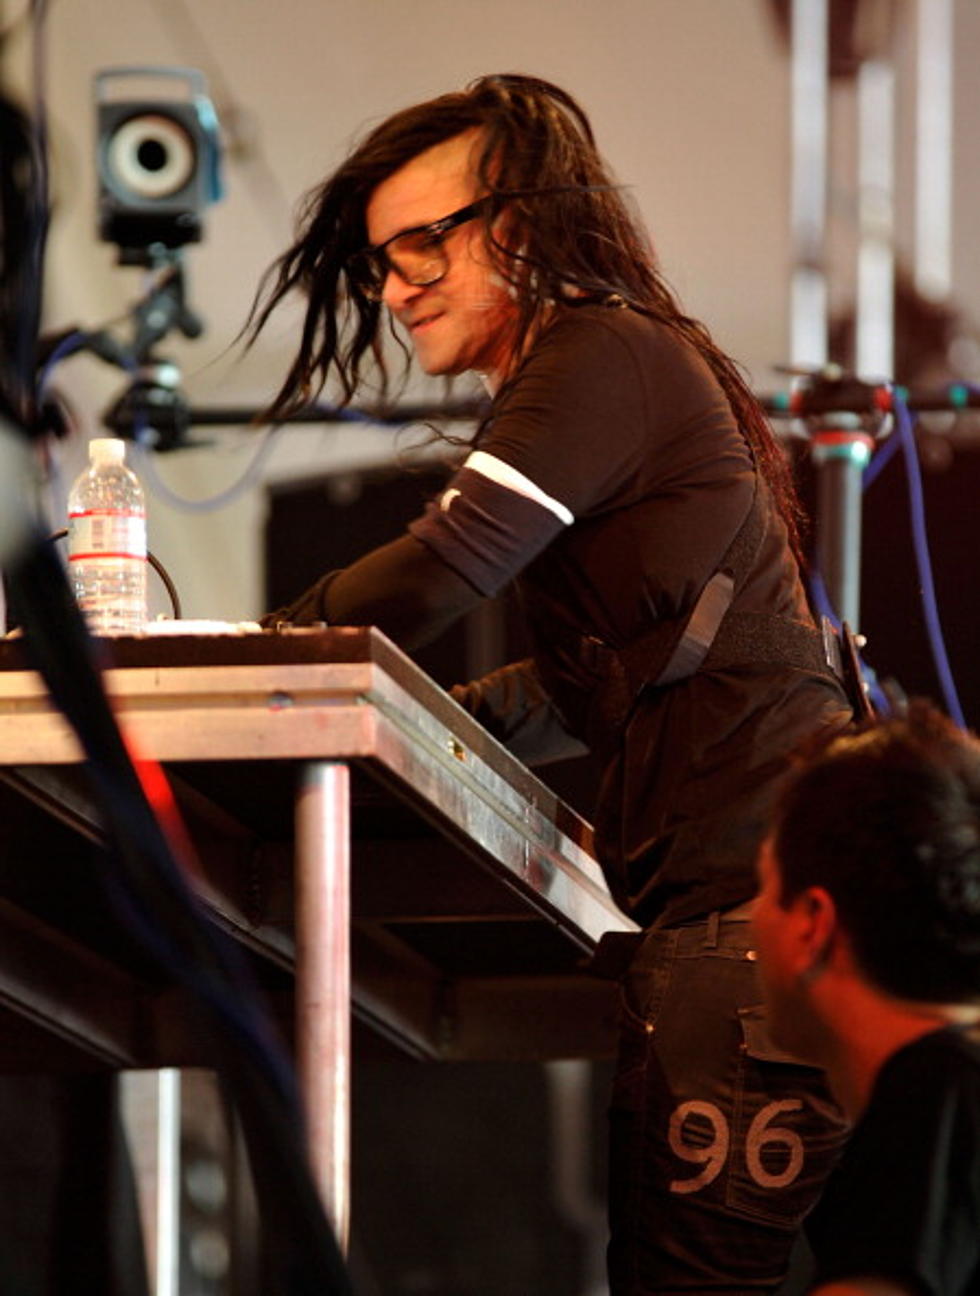 A Very Skrillex Christmas! The Cadger Dubstep Christmas House – First Of The Year (Equinox) [Video]